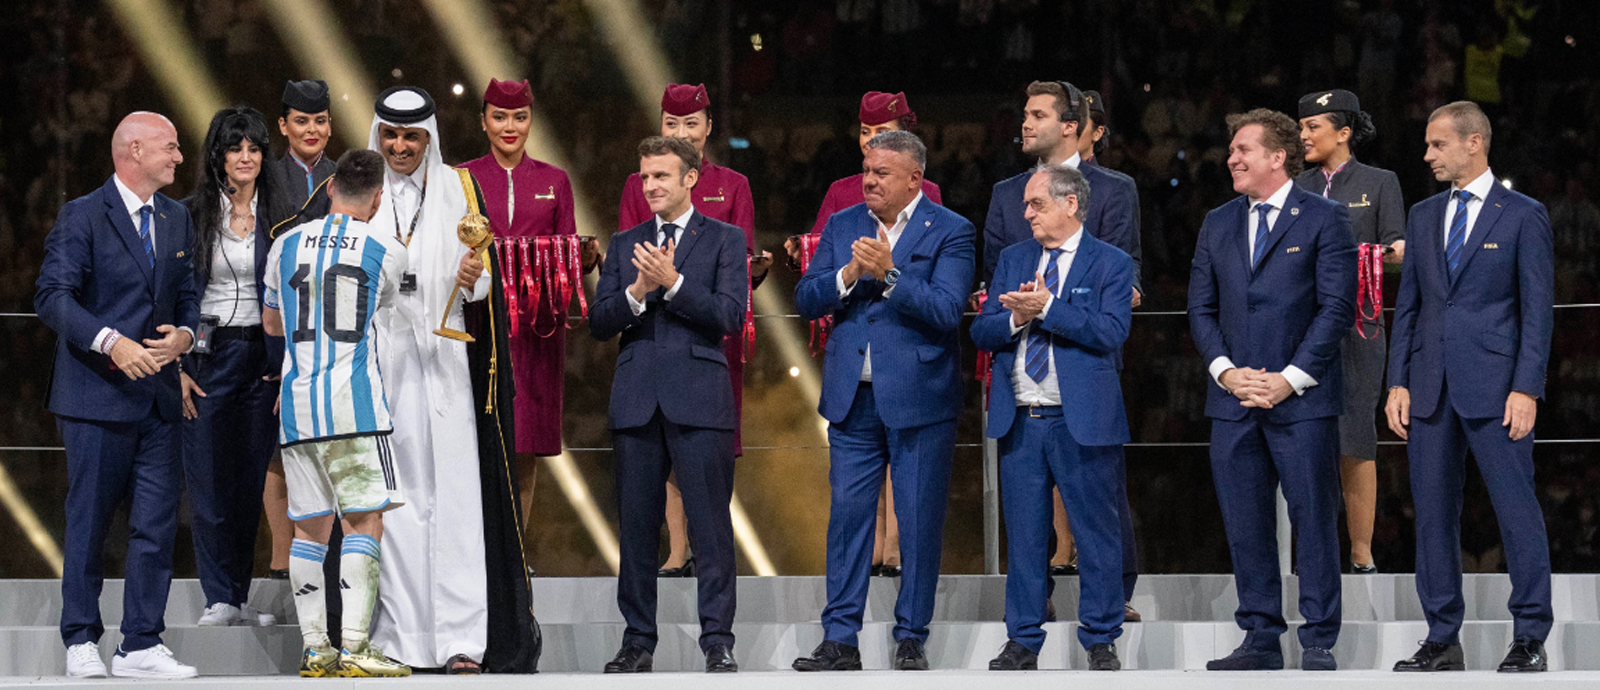 International News Agencies, Newspapers Commend Magnificent Closing Ceremony of World Cup